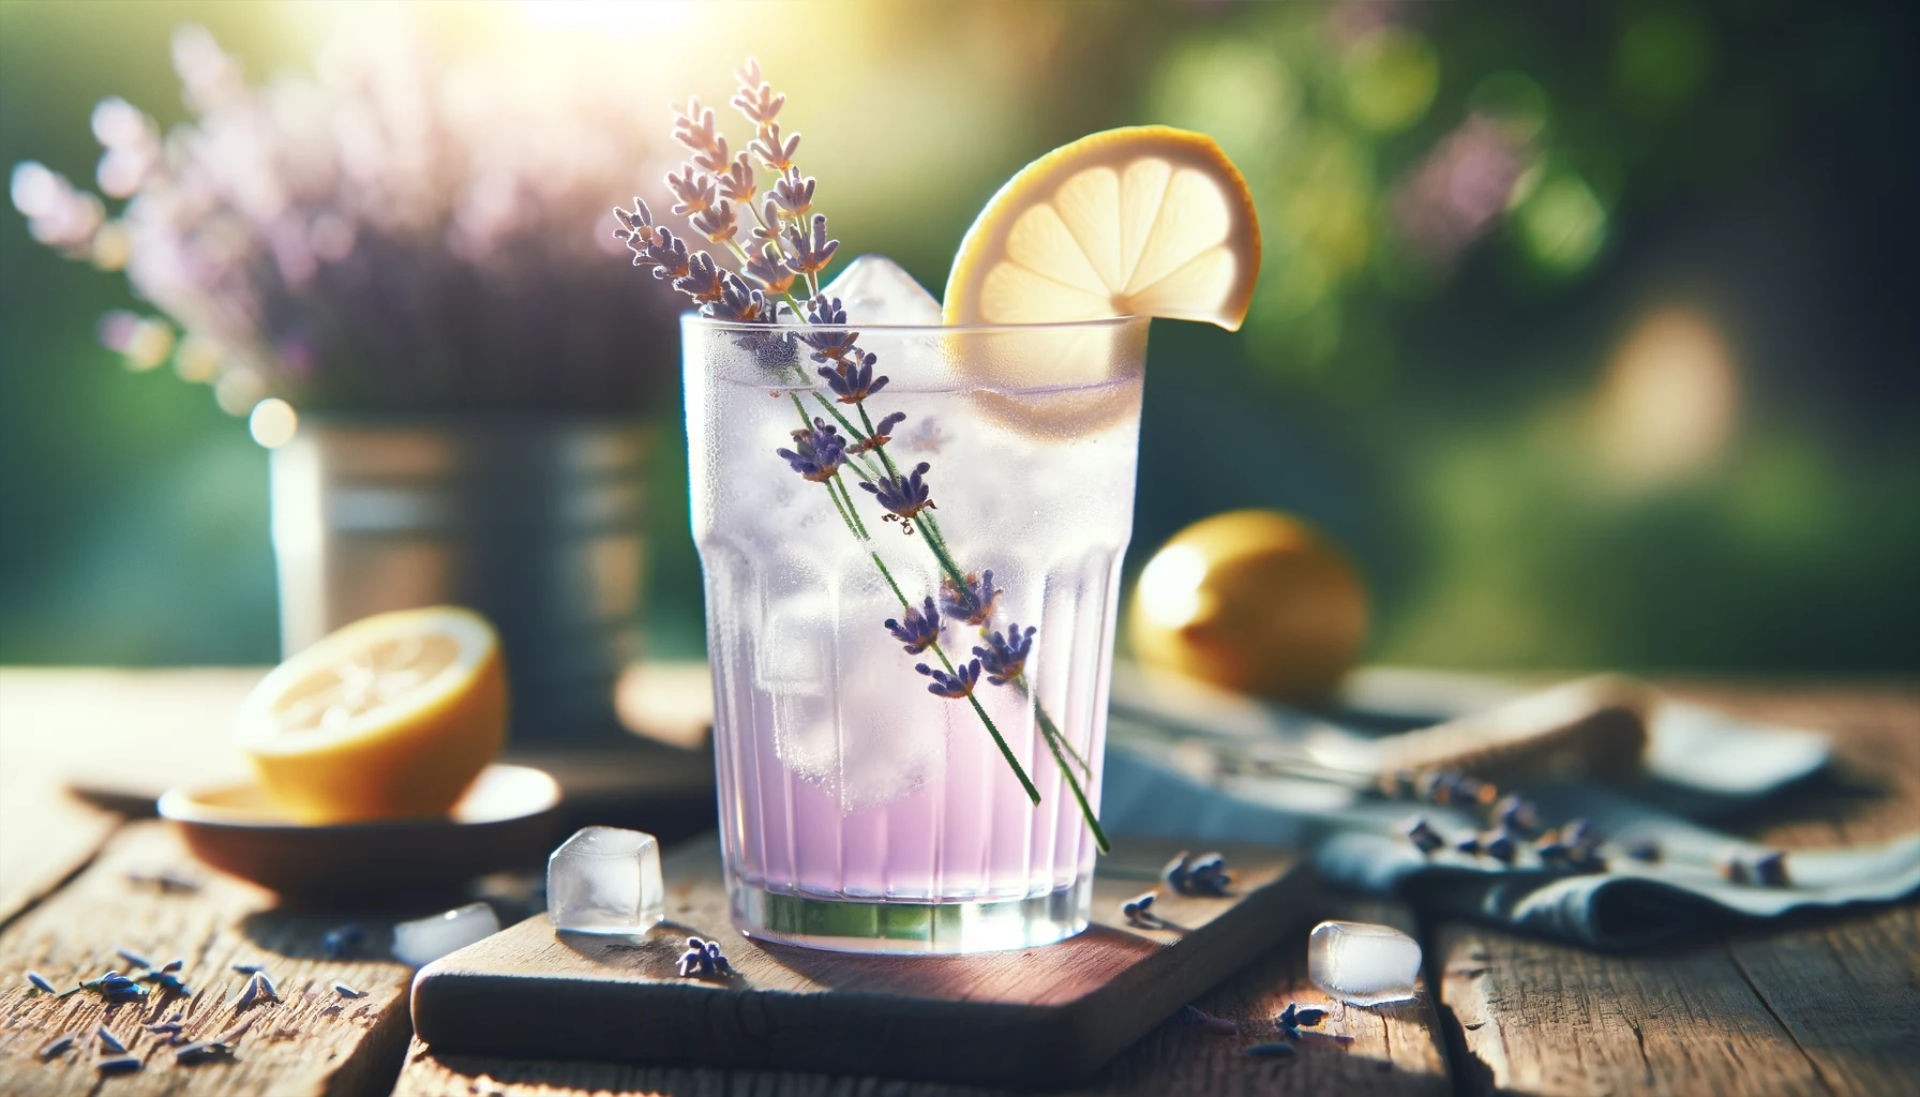 Lavender-Infused Lemonade, beautifully capturing its refreshing and summery essence. The glass filled with the lemonade, ice cubes, lemon slices, and a sprig of lavender, all set on a rustic wooden table against a natural backdrop, visually complements the recipe perfectly.